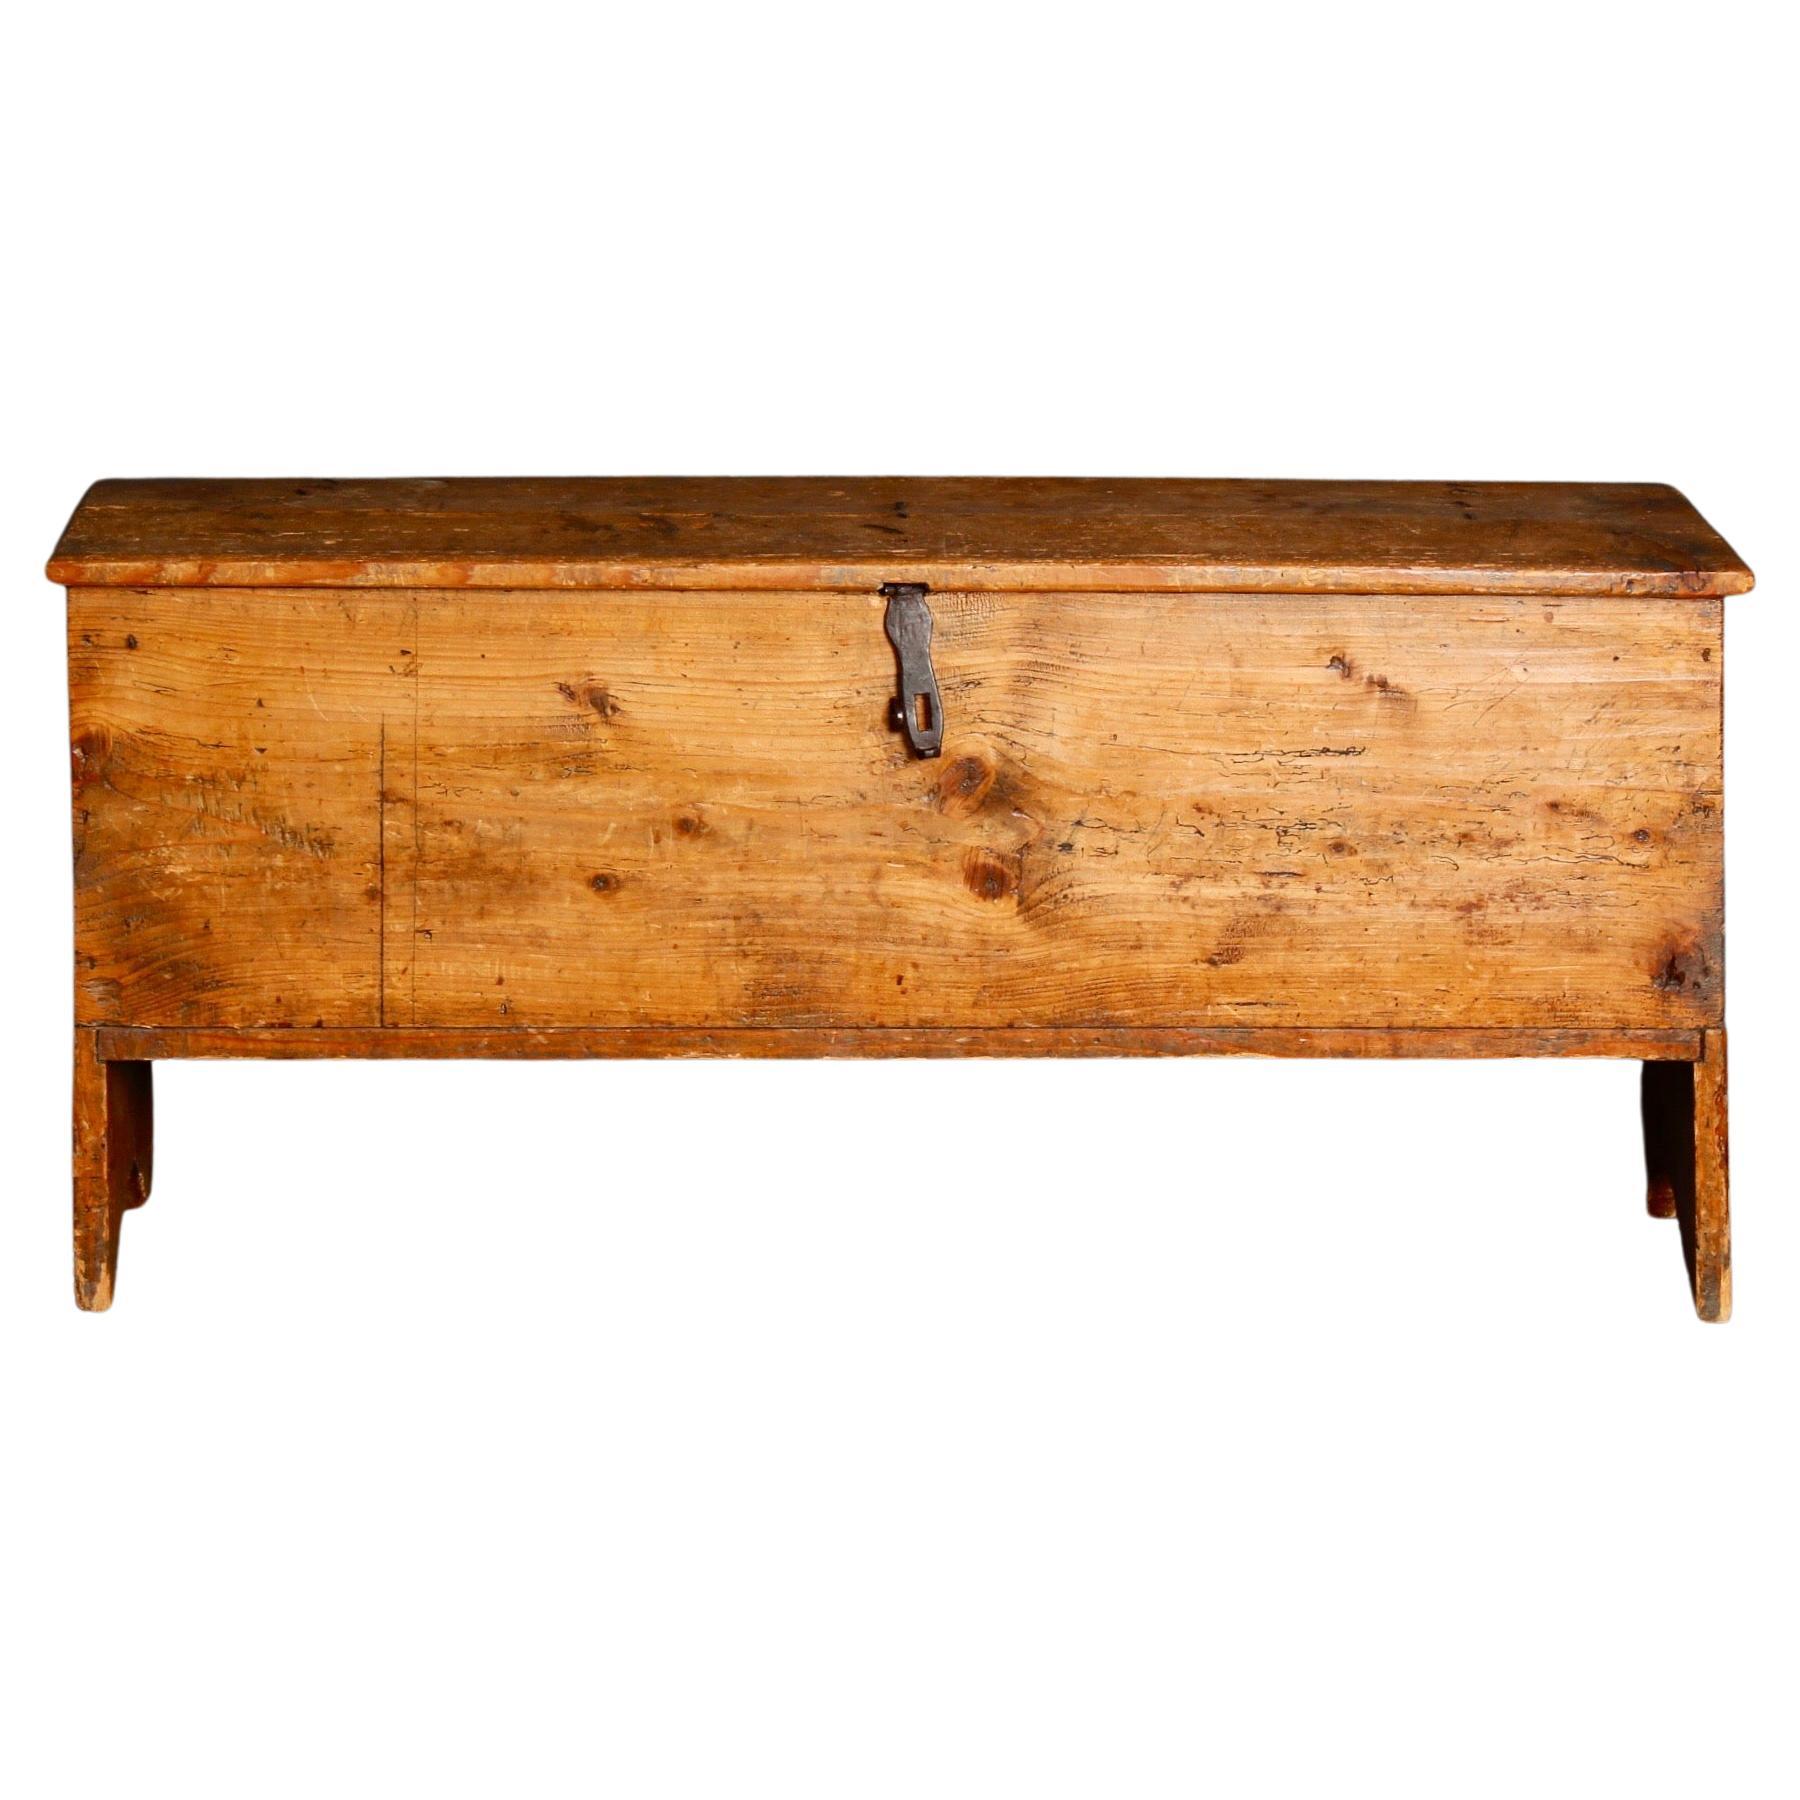 French alp trunk from Haute savoie region  For Sale